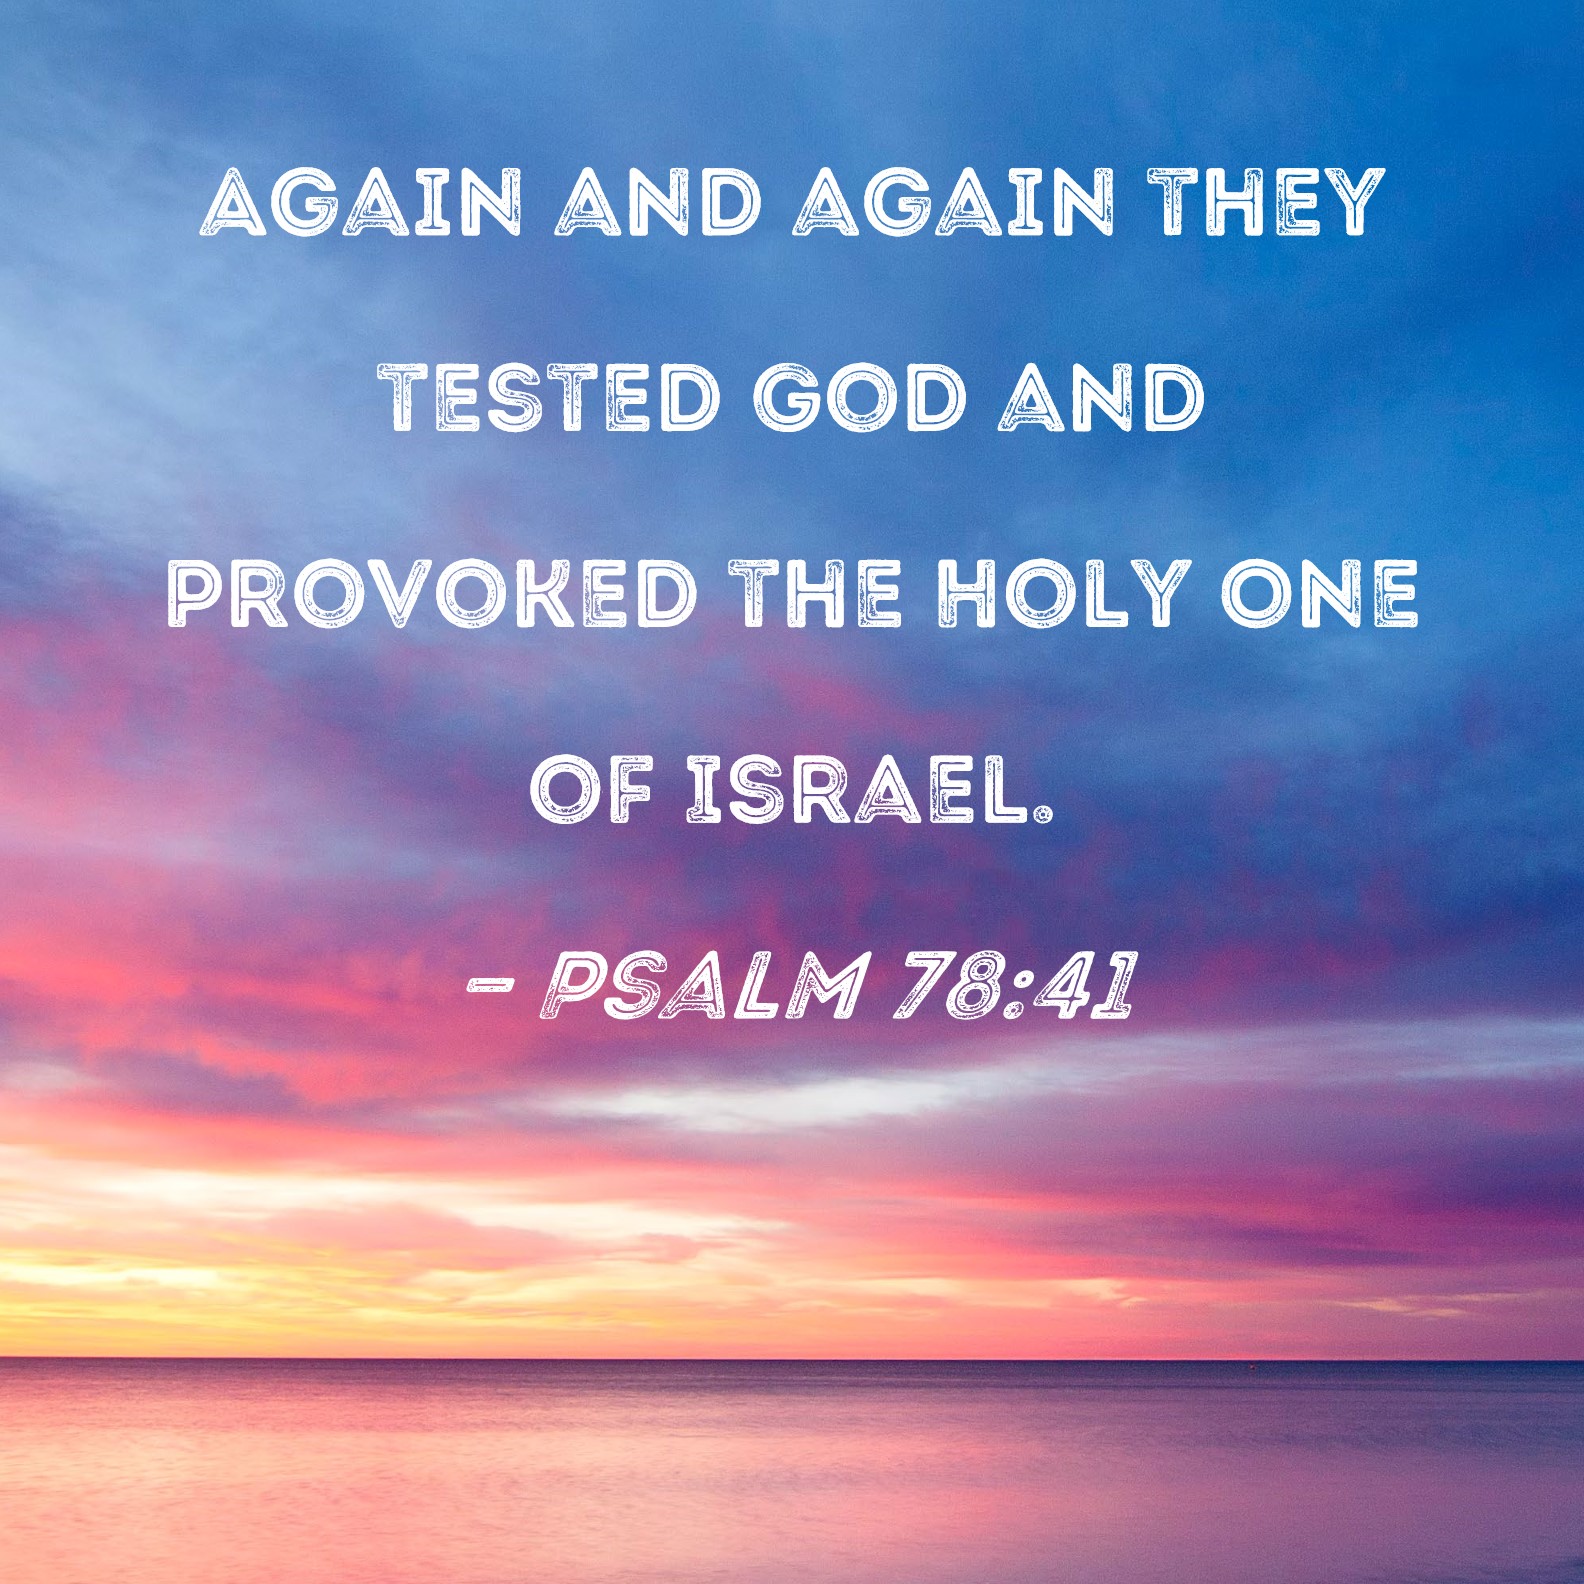 Psalm 78:41 Again and again they tested God and provoked the Holy One ...